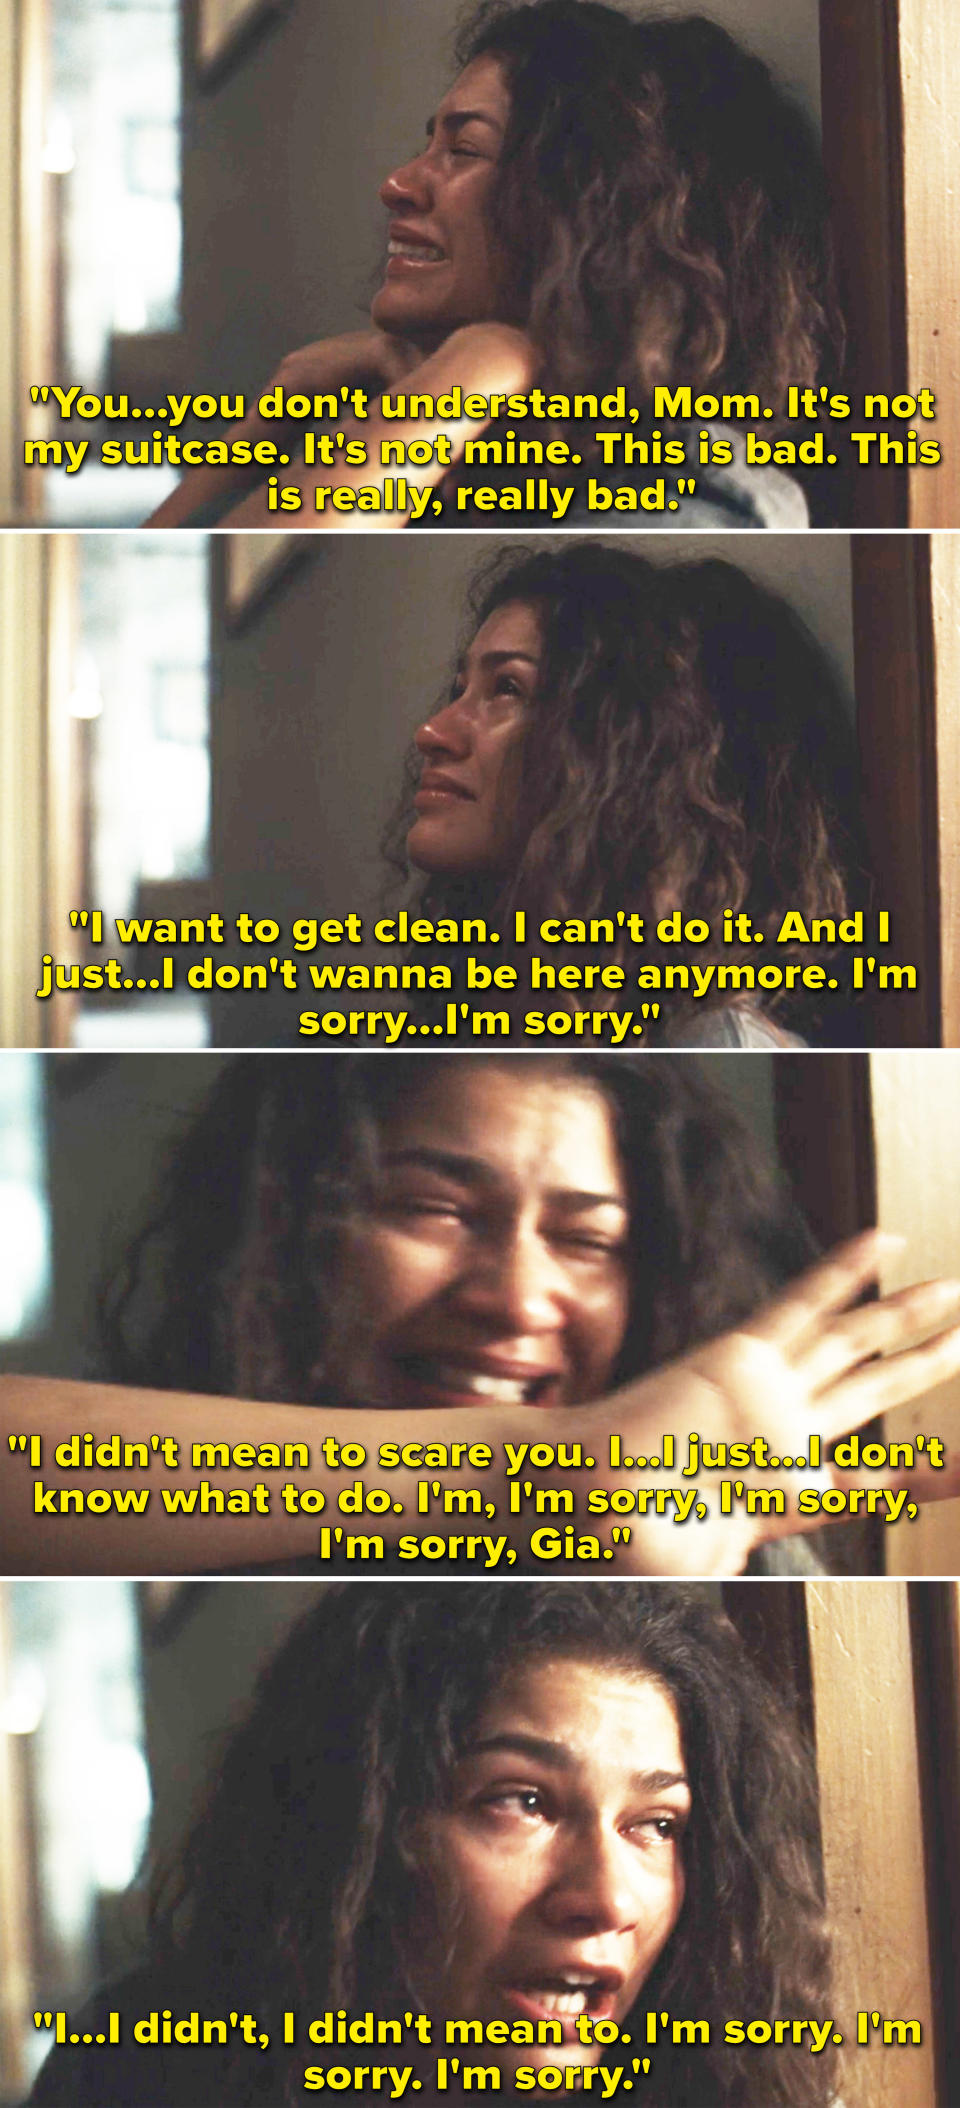 Zendaya crying and telling her mom she's sorry and will get clean from drugs in Euphoria